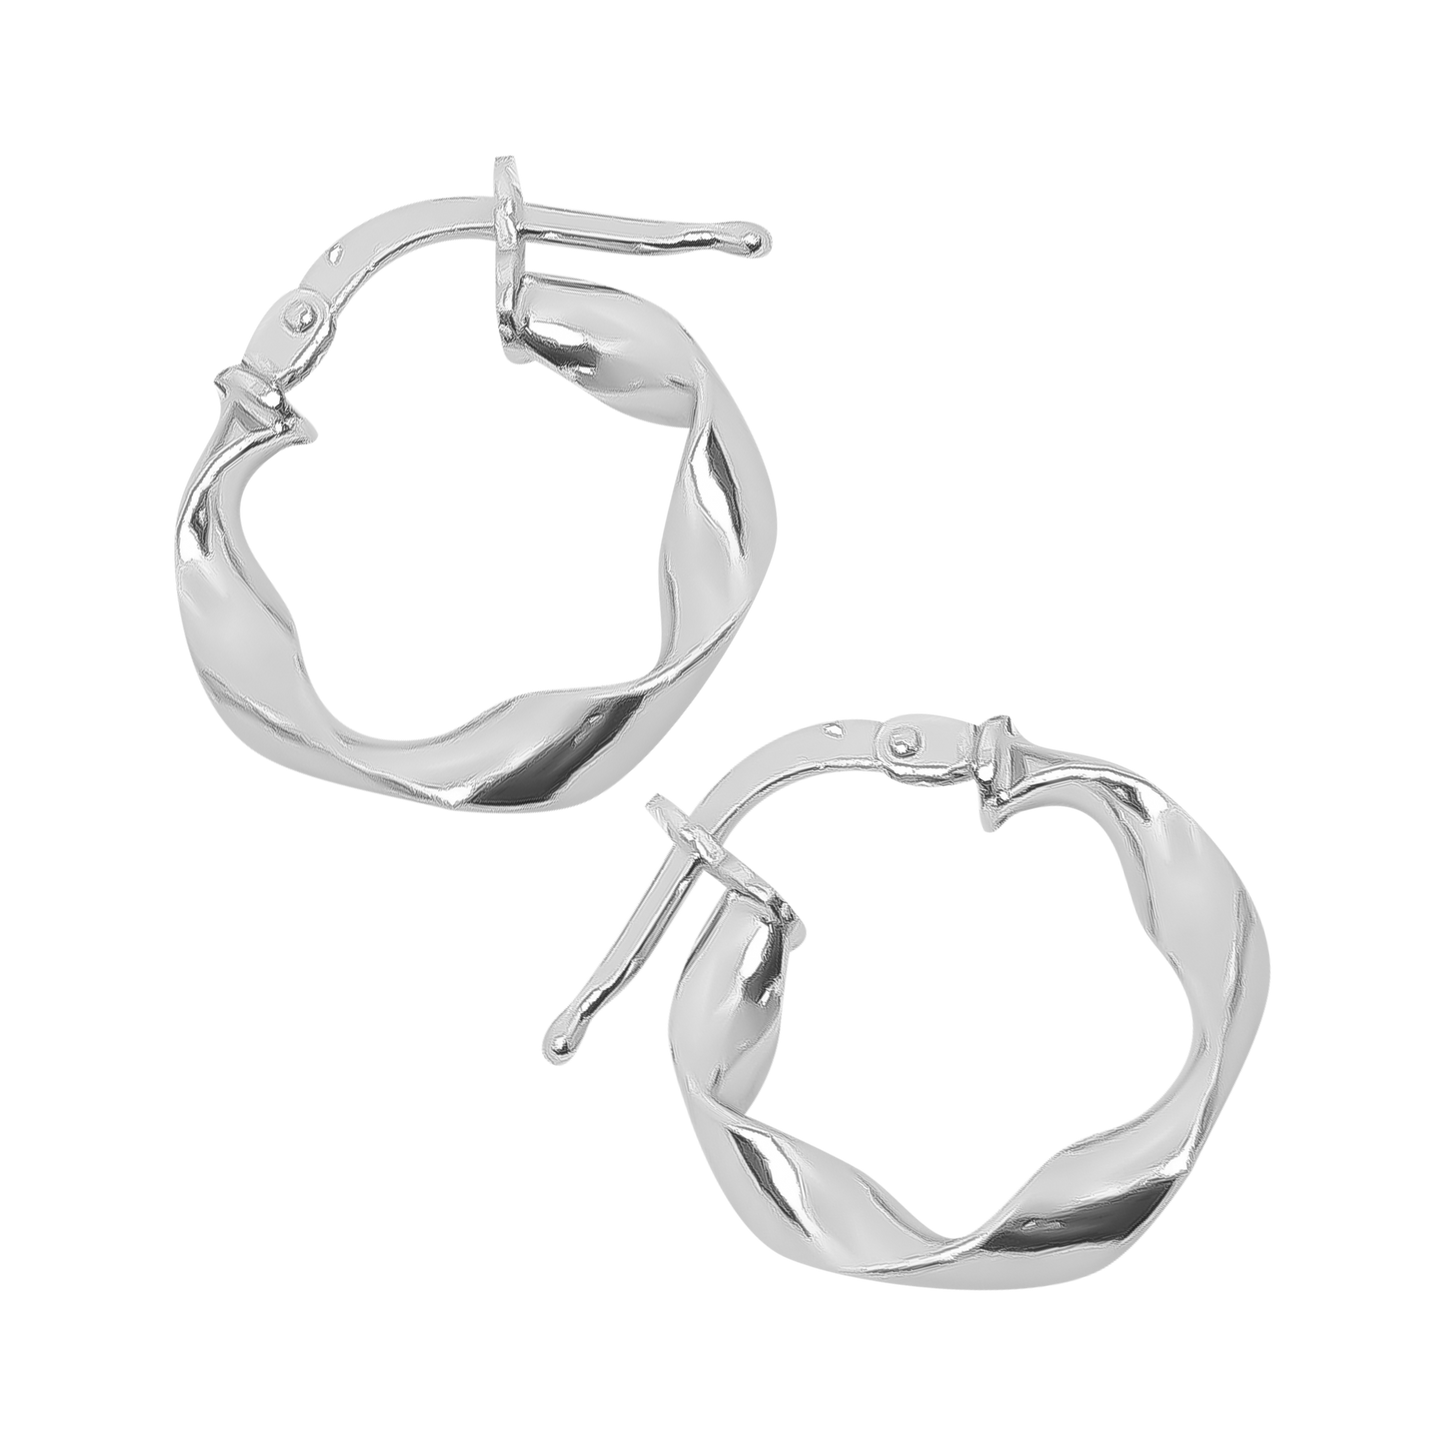 1.5cm Small Mangle Hoops in 925 Sterling Silver